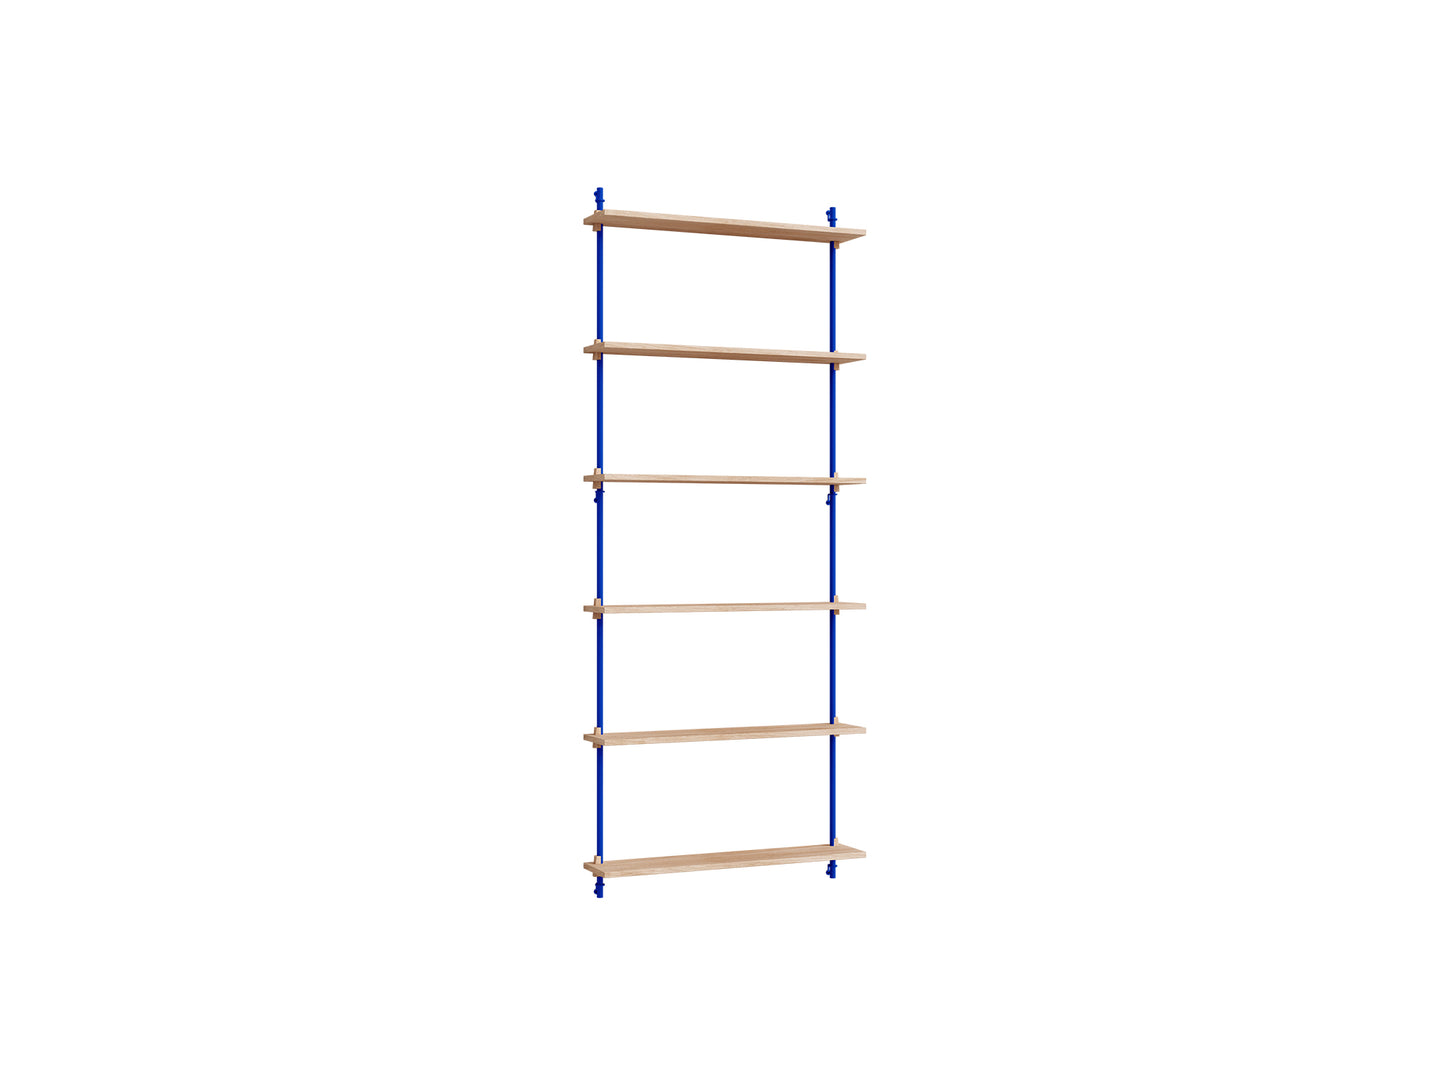 Wall Shelving System Sets (200 cm) by Moebe - WS.200.1 / Deep Blue Uprights / Oiled Oak